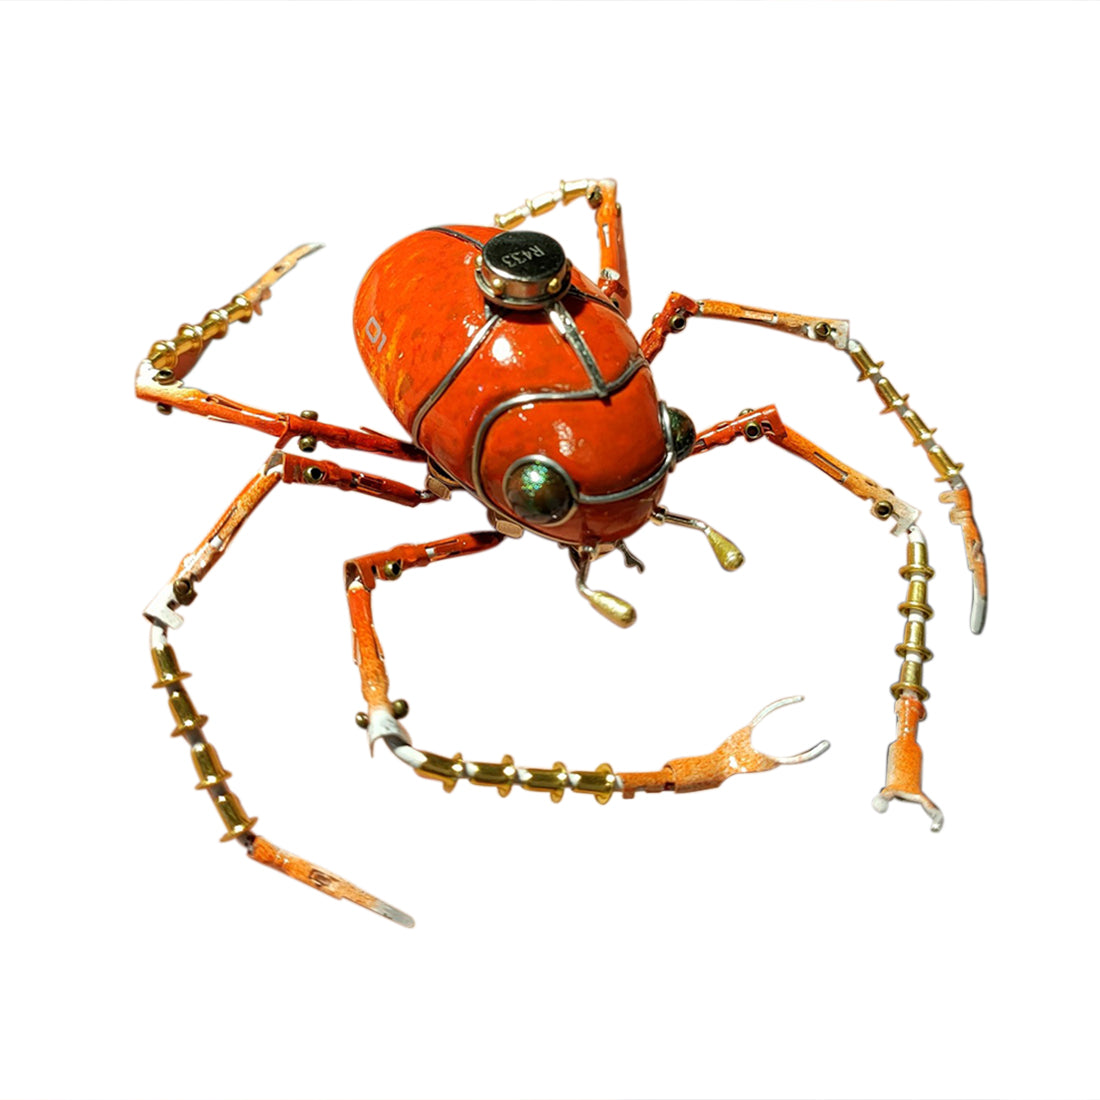 Steampunk Red Little Six-Legs Beetle 3D Metal Bug Insect Model Handmade Assembled Crafts